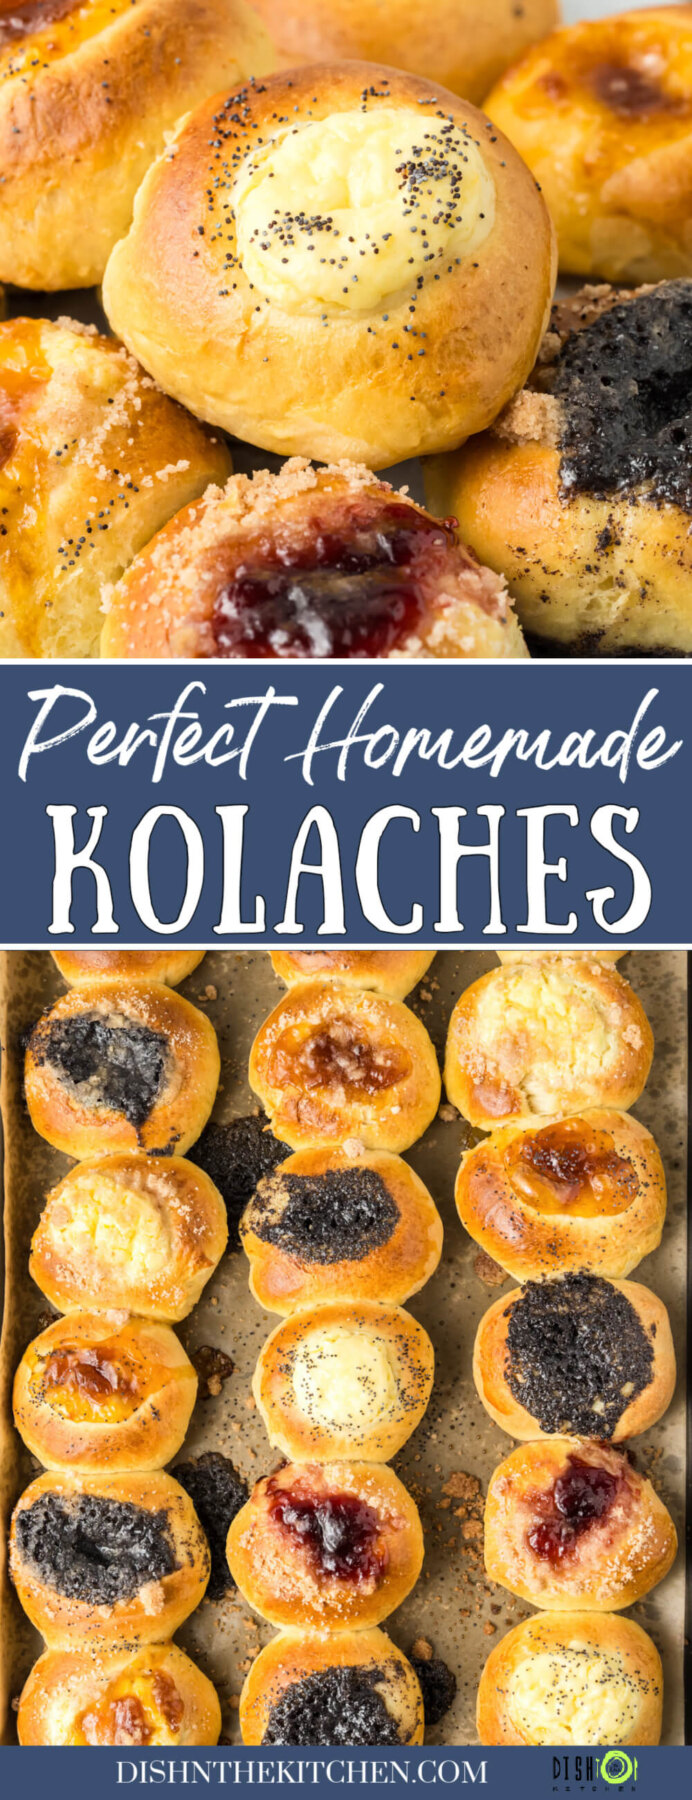 Pinterest image featuring golden baked Kolache pastries filled with a variety of fillings and topped with a sweet crumble.